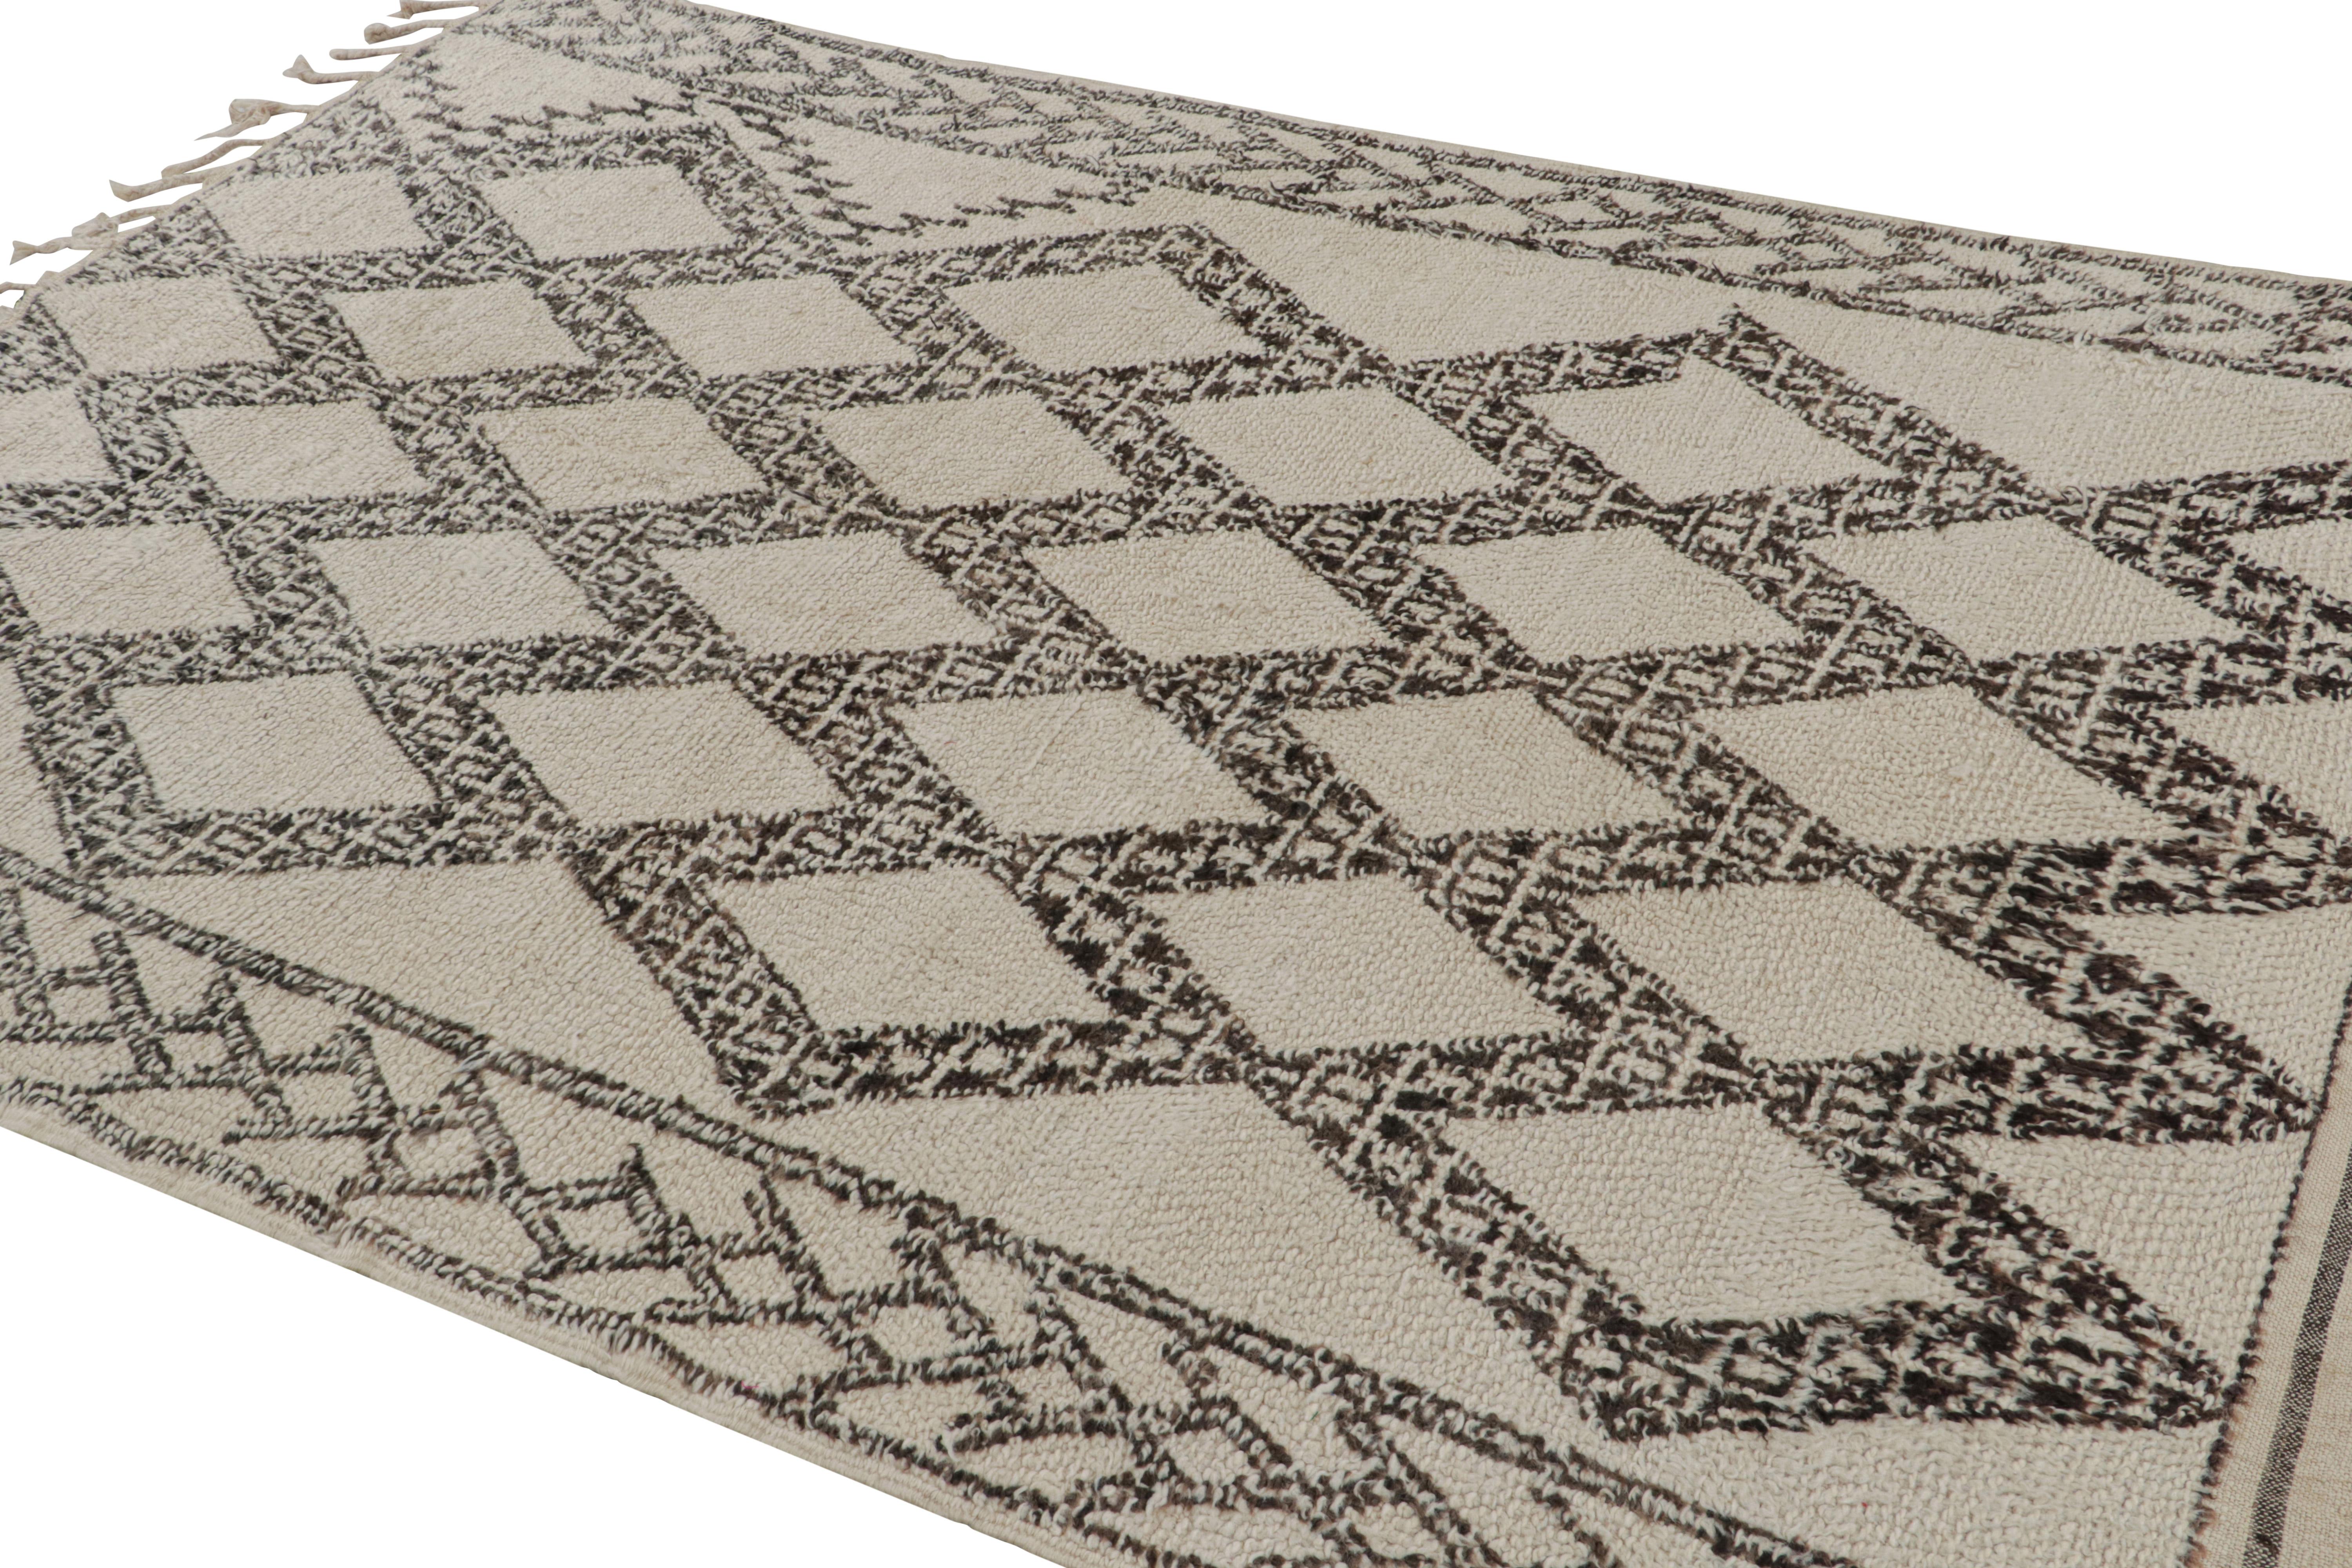 Hand-knotted in wool circa 1950-1960, this vintage 6x9 Moroccan rug is believed to hail from the Azilal tribe. 

On the Design: 

This rug carries a repetition of the prominent diamond lozenge motifs in the primitivist Berber style lending an